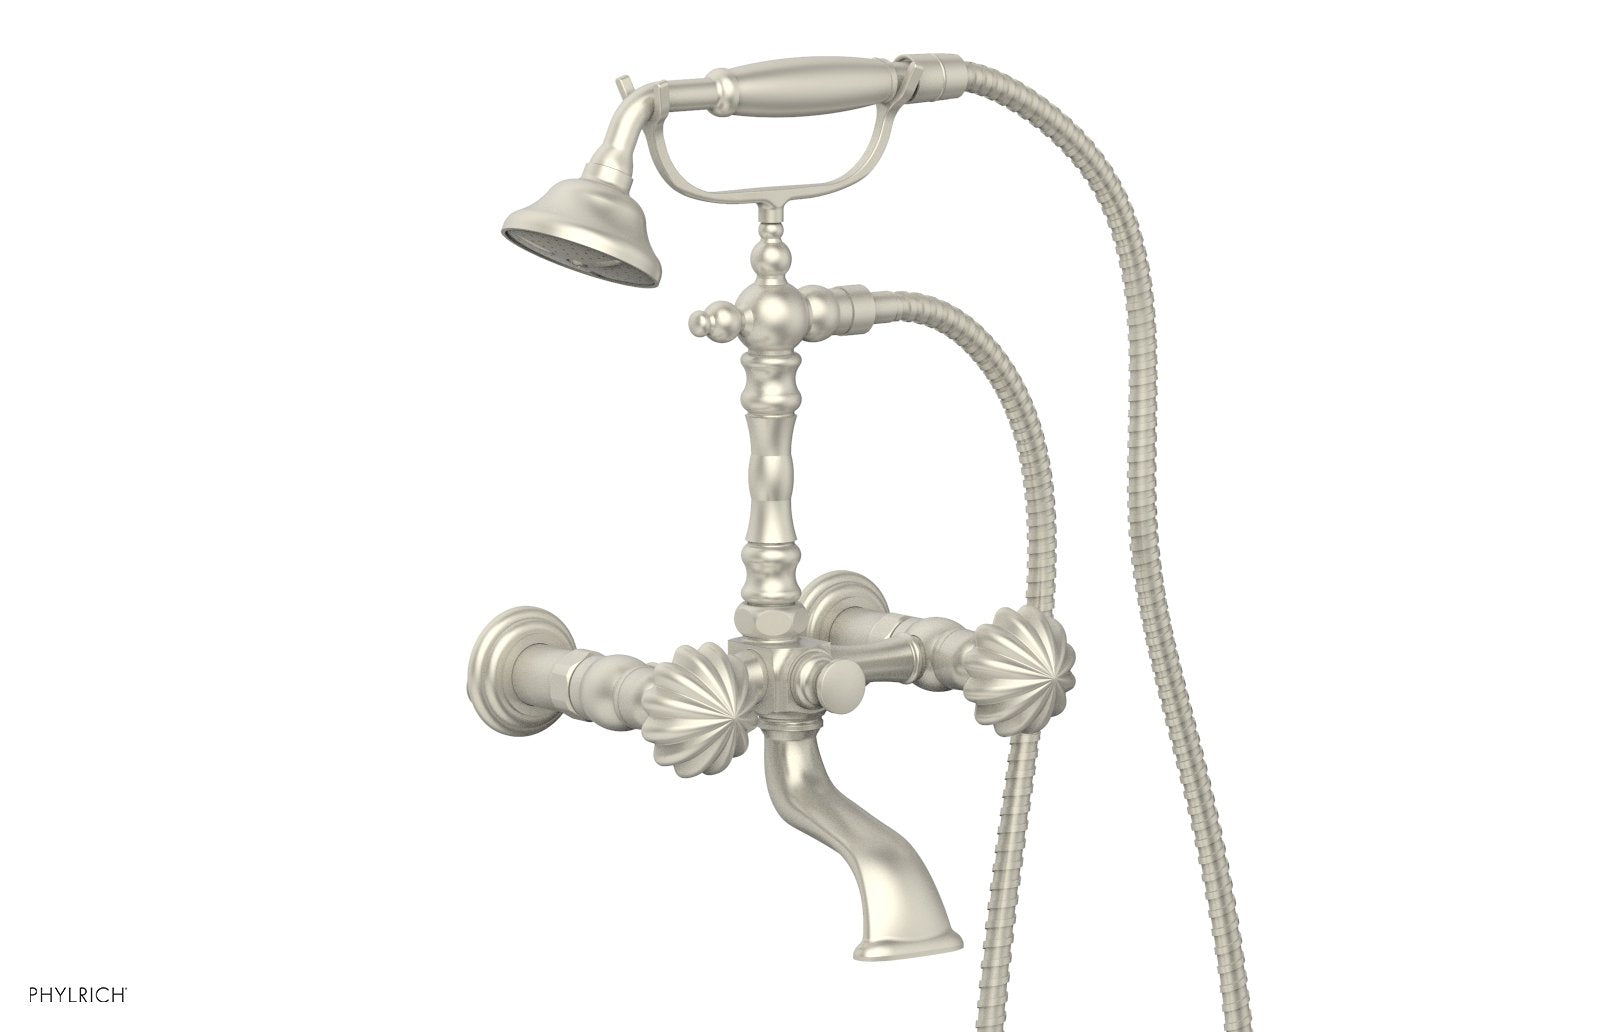 Phylrich GEORGIAN & BARCELONA Exposed Tub & Hand Shower - Round Handle